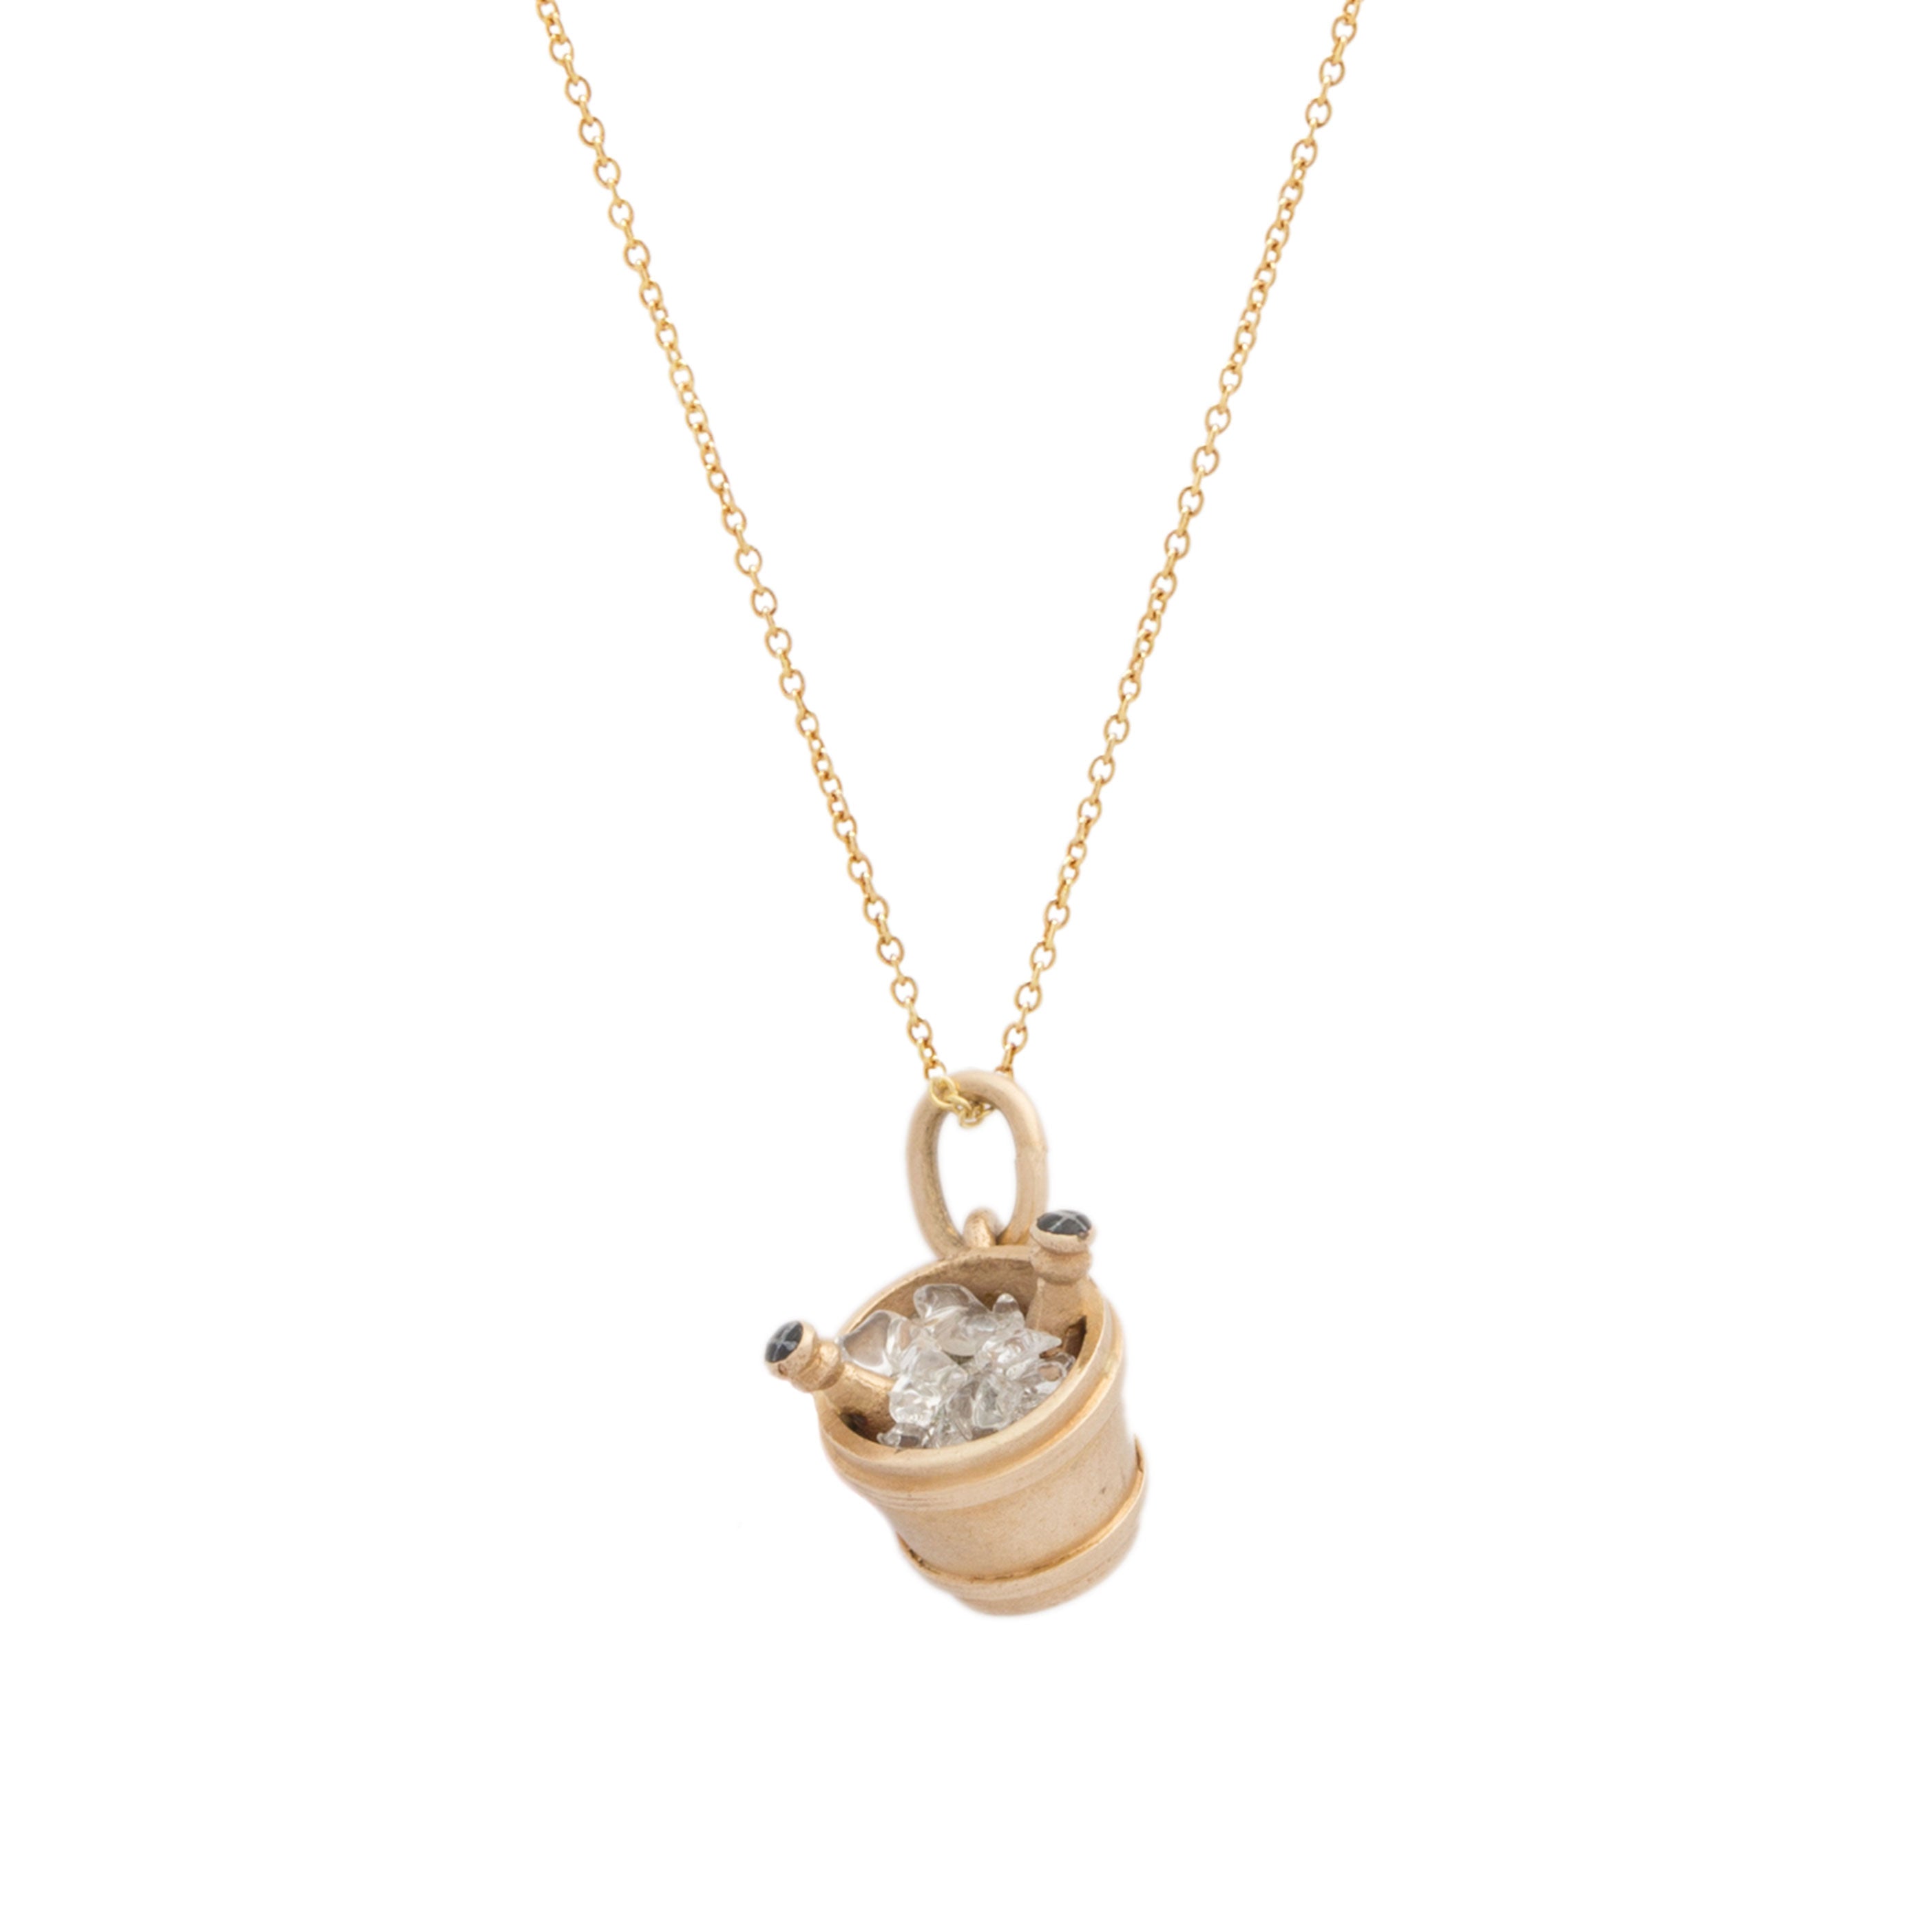 Champagne Bucket With Enamel and 14K Gold Charm